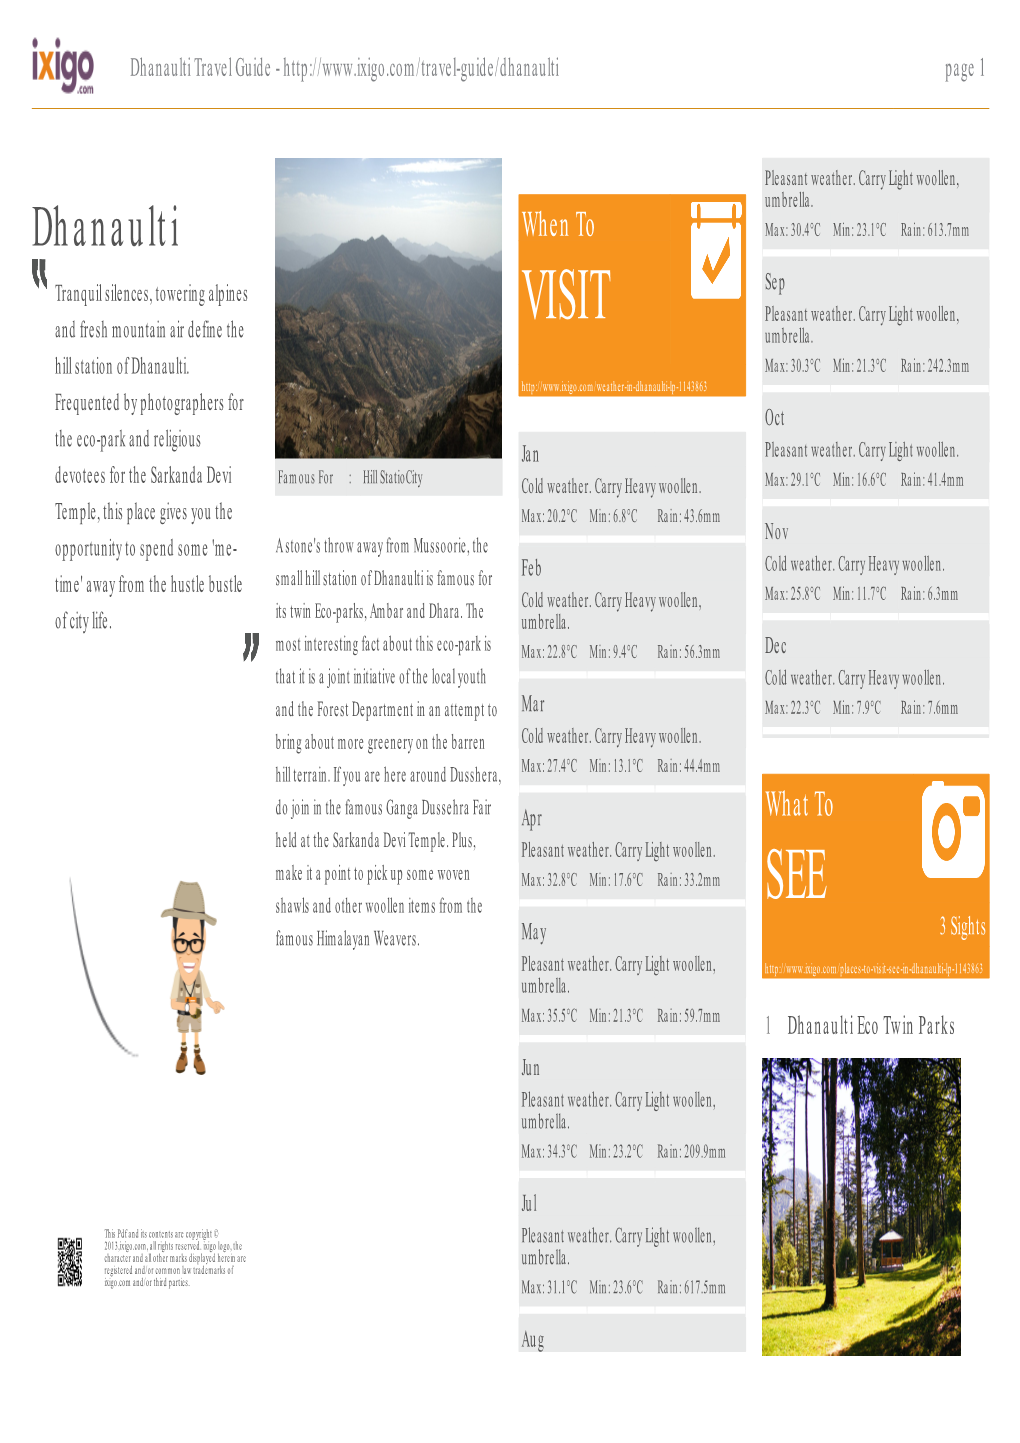 Dhanaulti Travel Guide - Page 1